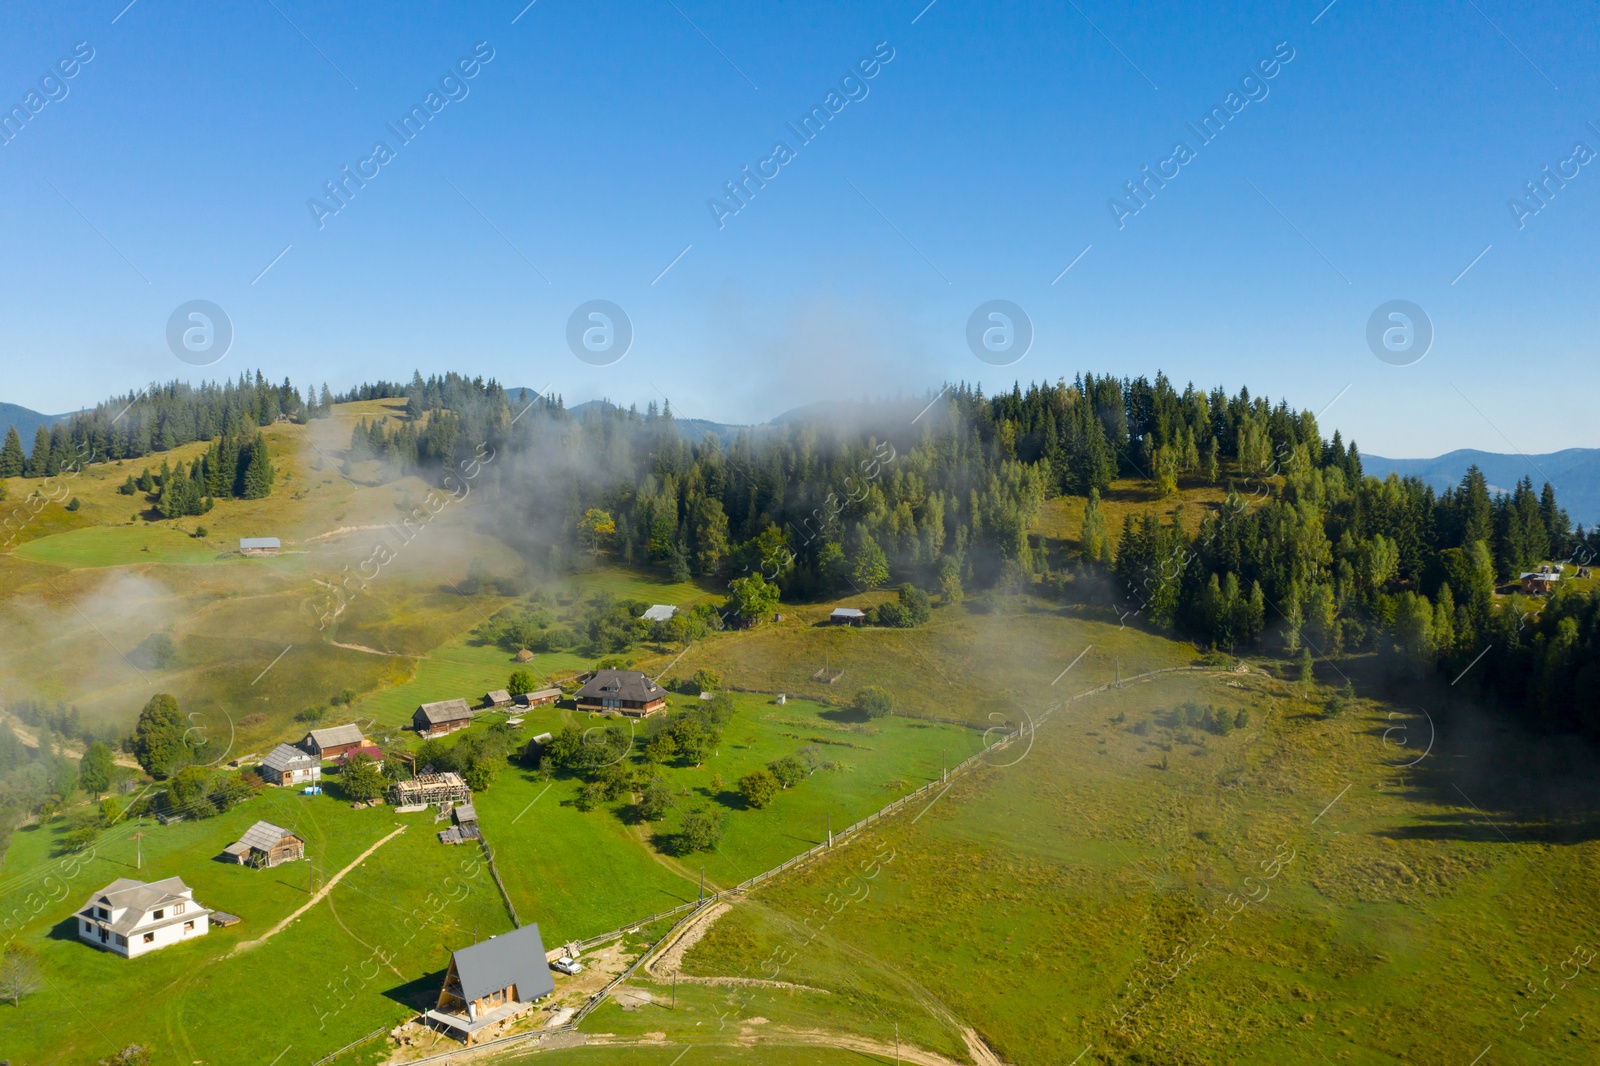 Image of Aerial view of beautiful landscape with misty forest and village in mountains